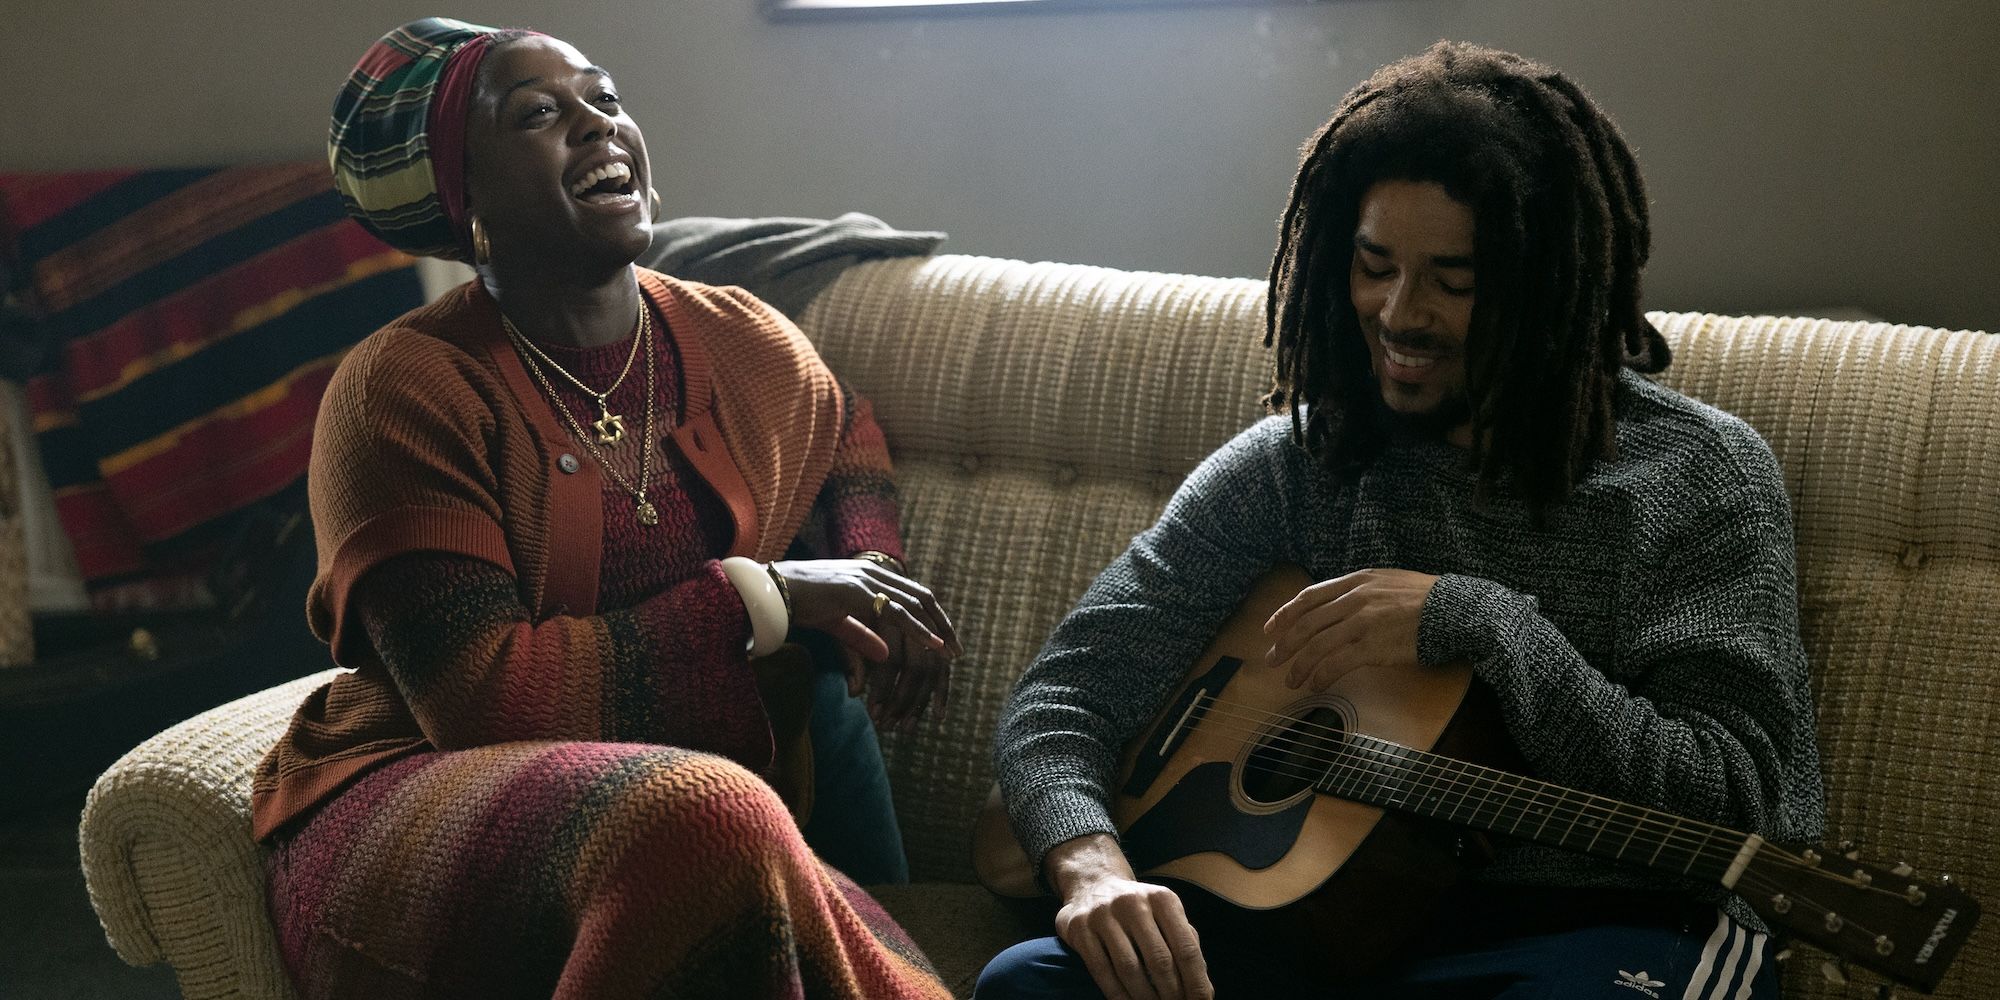 New Bob Marley Movie Has Exceptionally High Rotten Tomatoes Audience Score Despite Negative Reviews